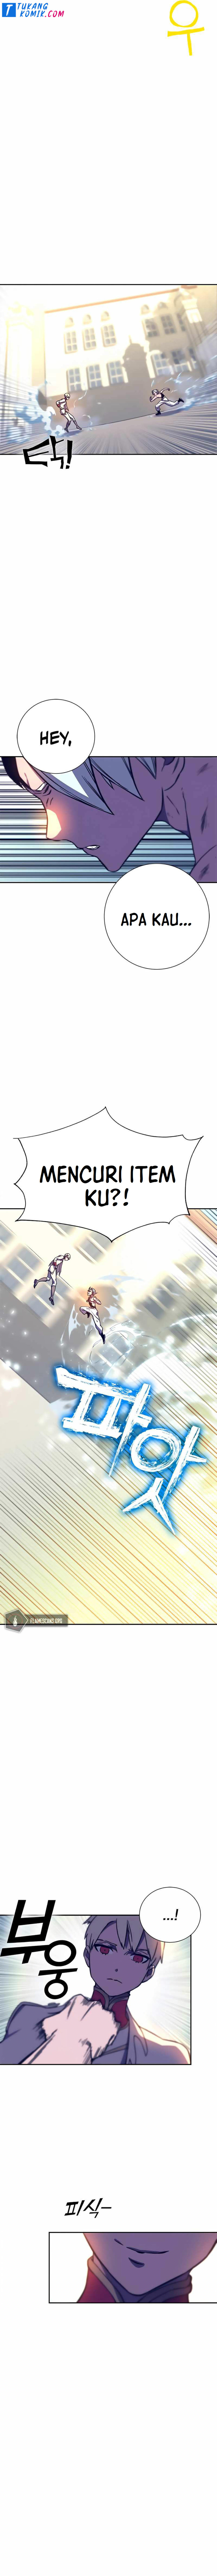 x-ash Chapter 11